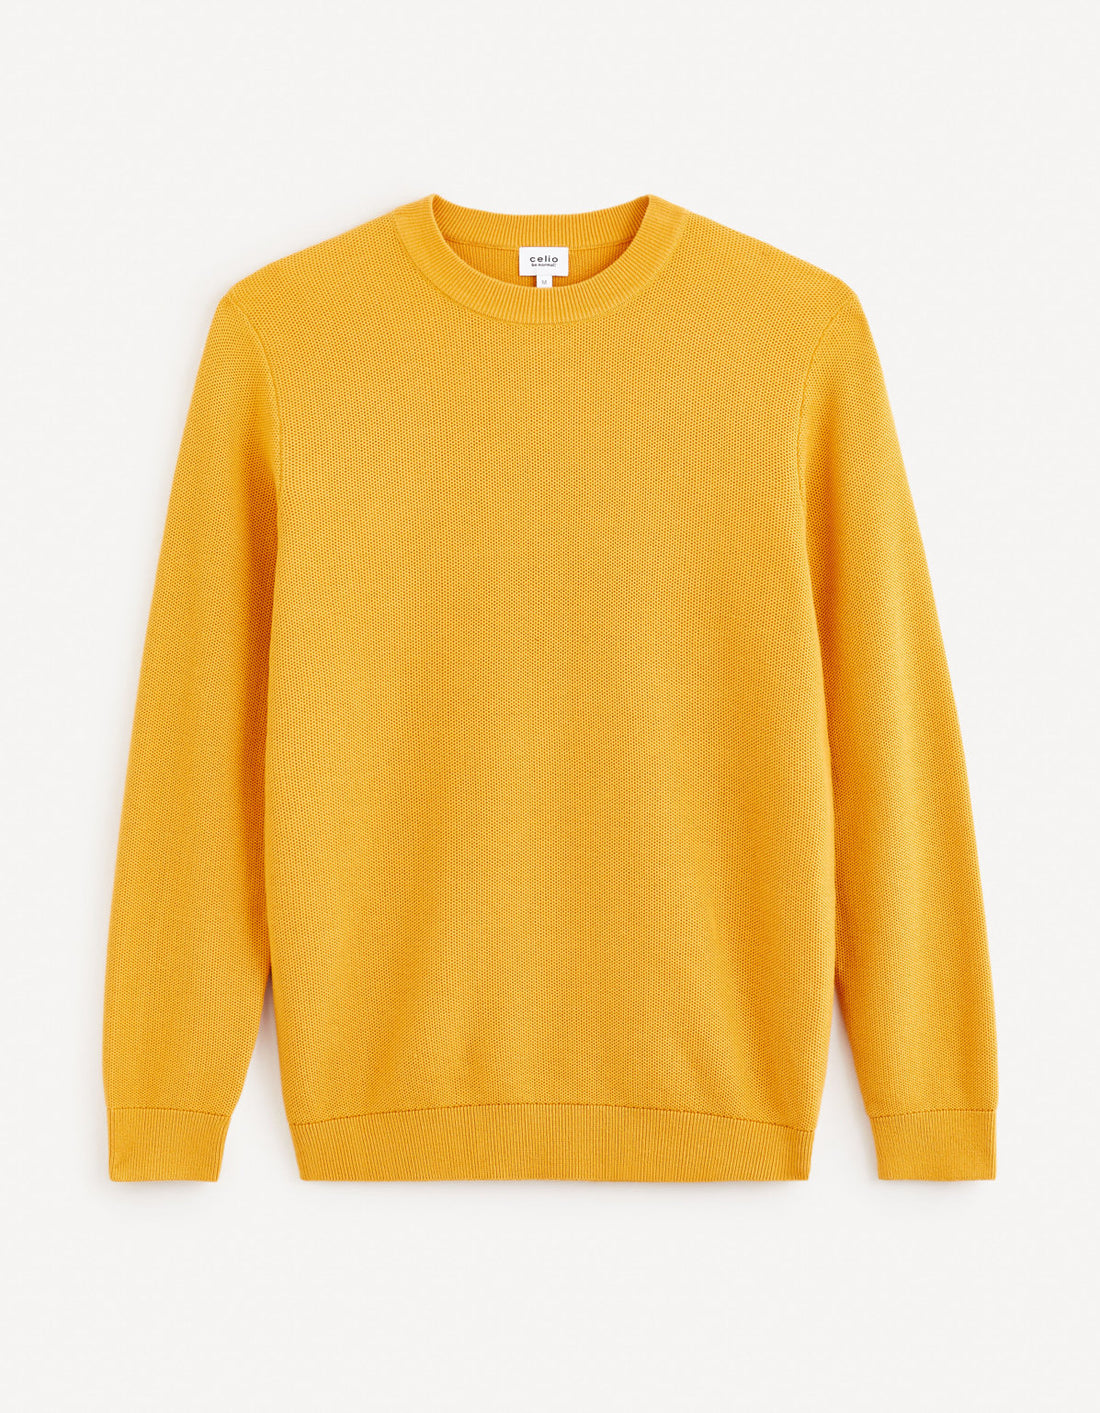 100% Cotton Round Neck Sweater - Yellow_BEPIC_JAUNE MOUTARDE_02